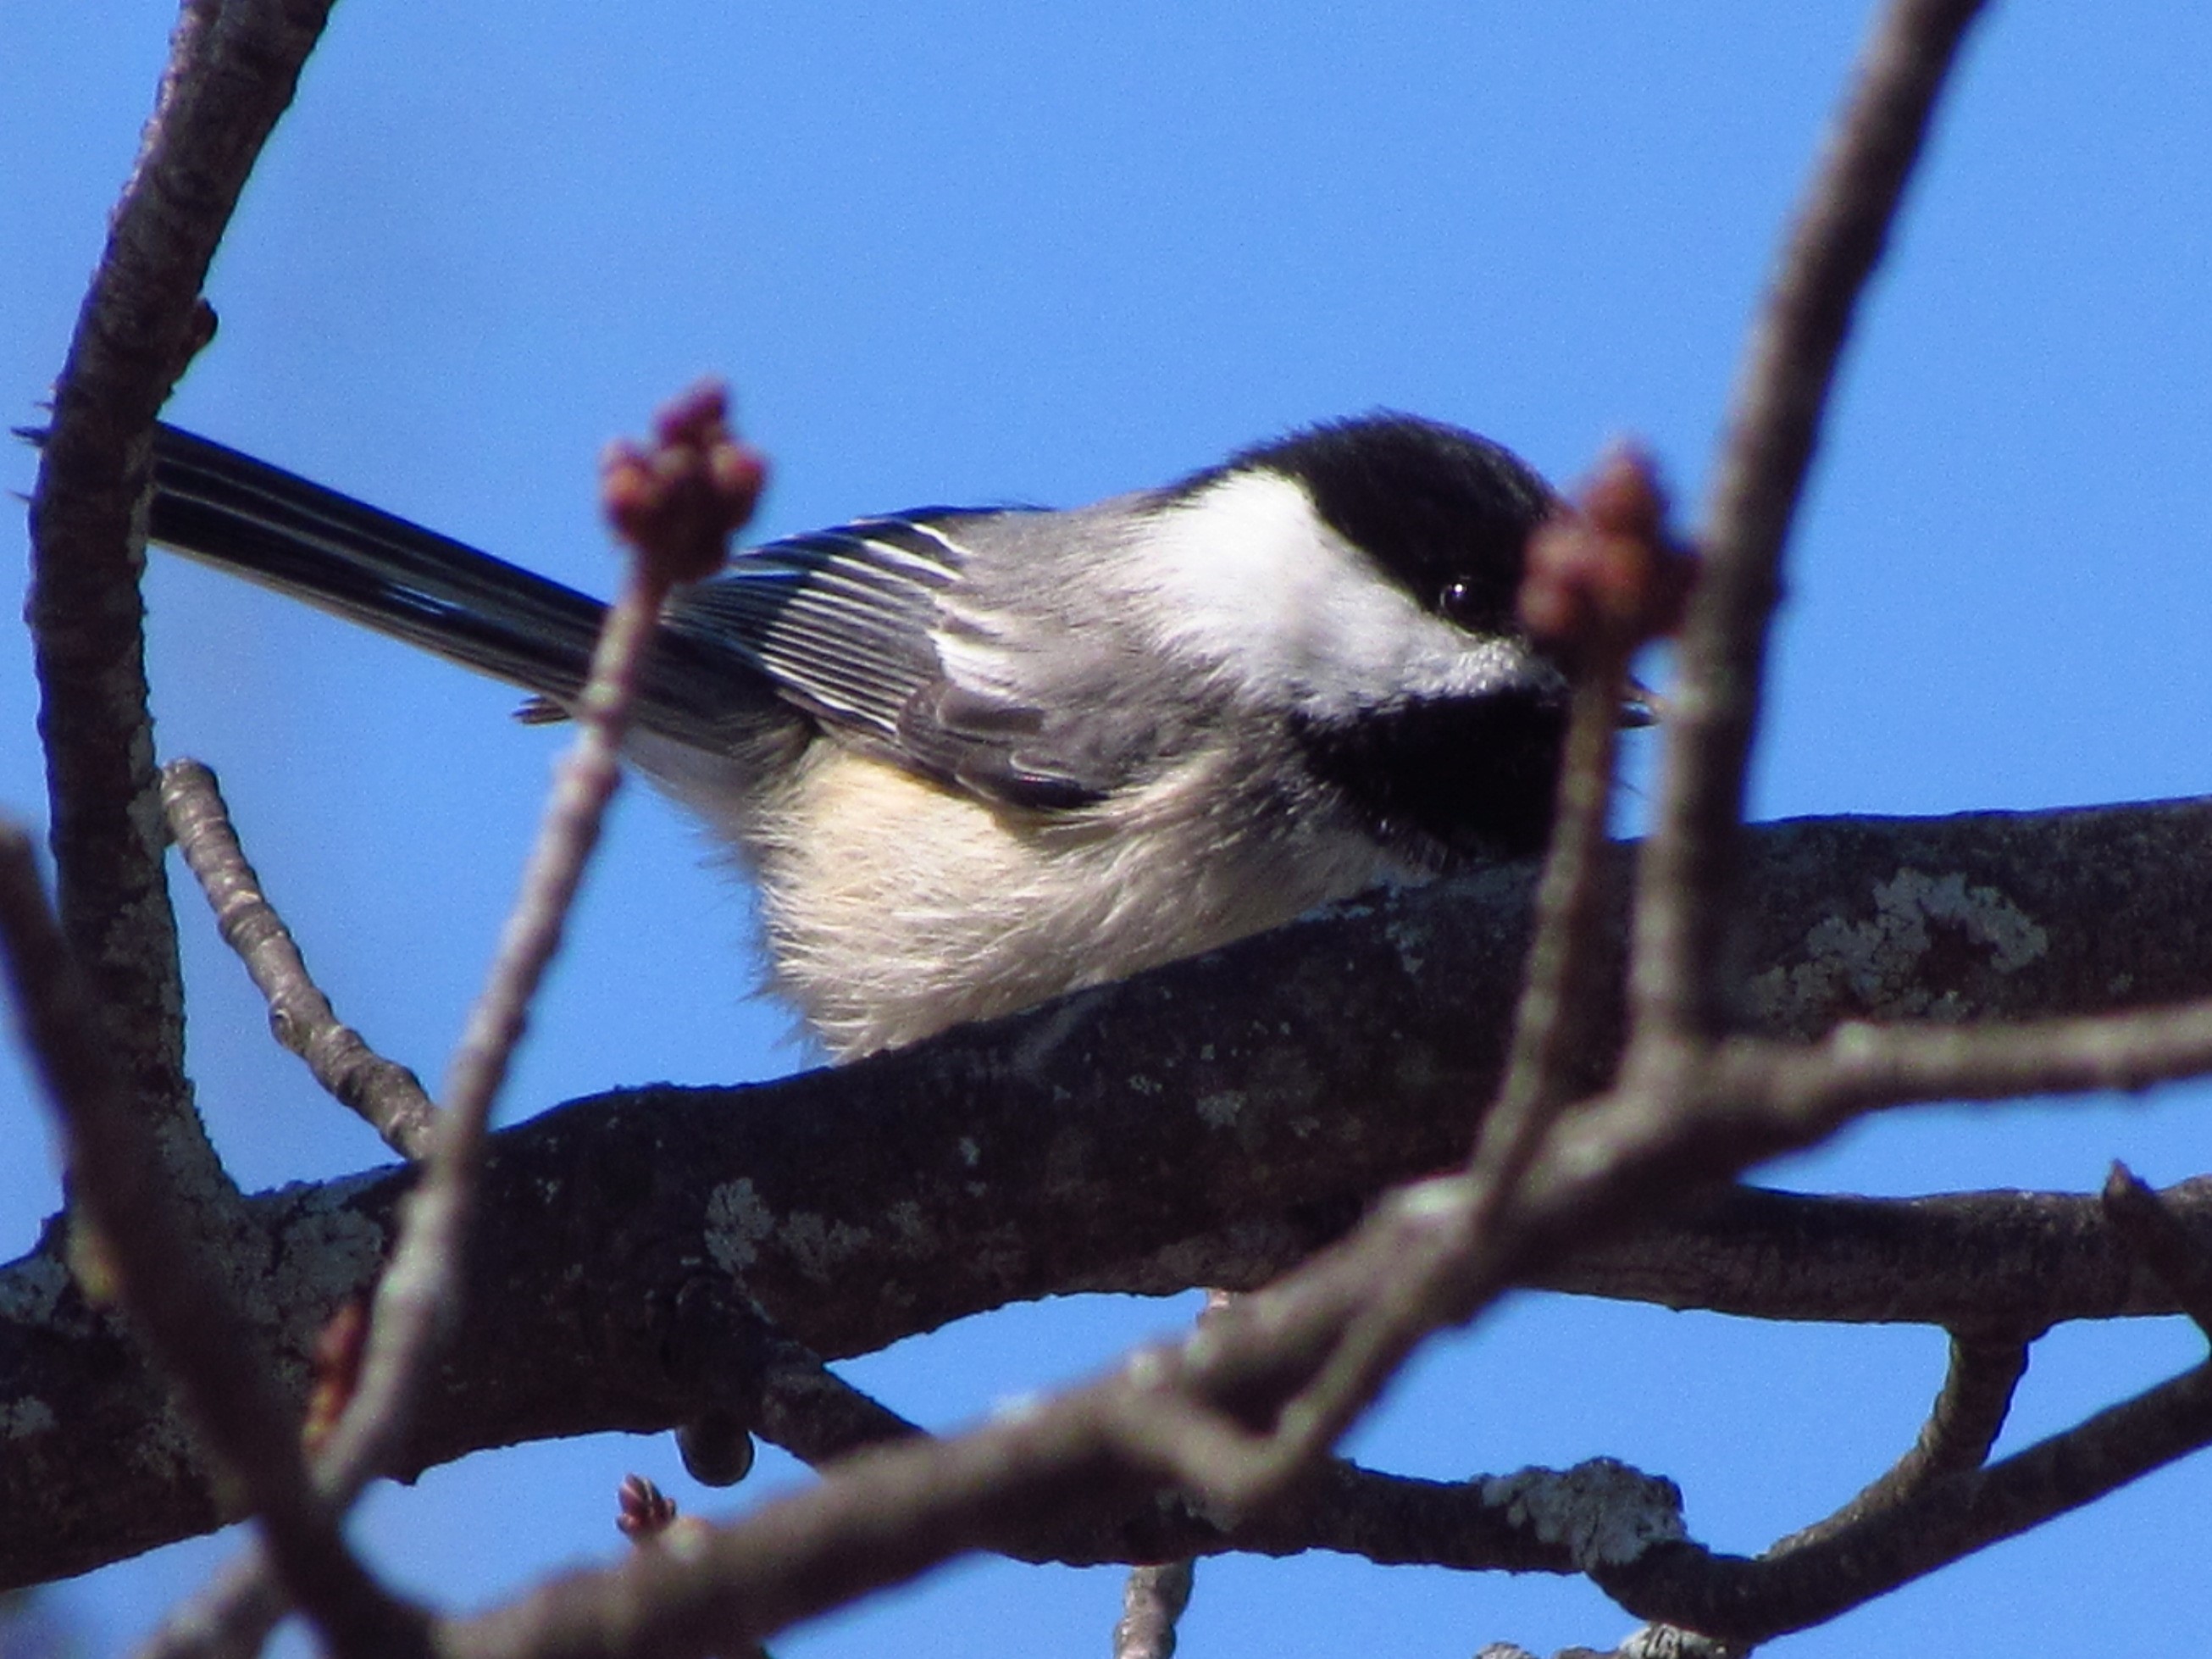 A Black-capped Chickadee sits on a branch against a dark, but bright blue sky.